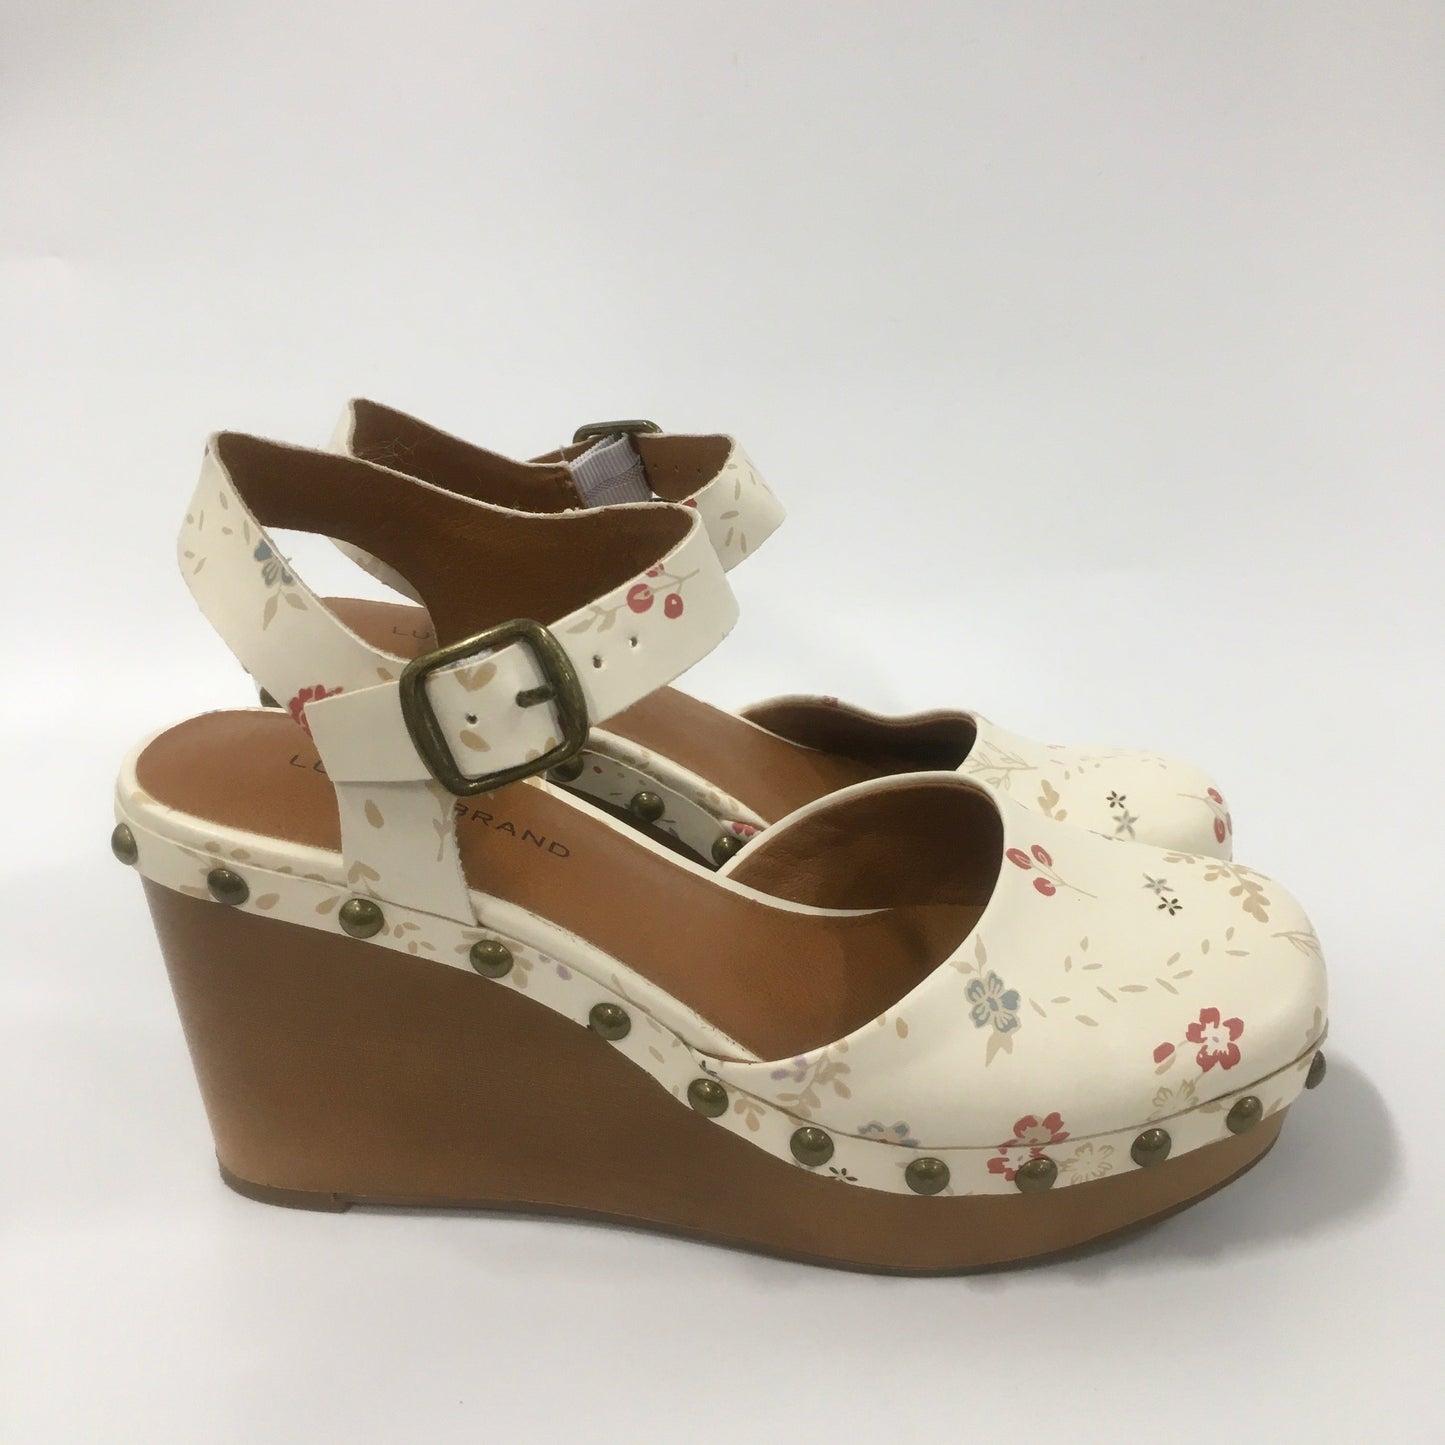 White Shoes Heels Wedge Lucky Brand, Size 6